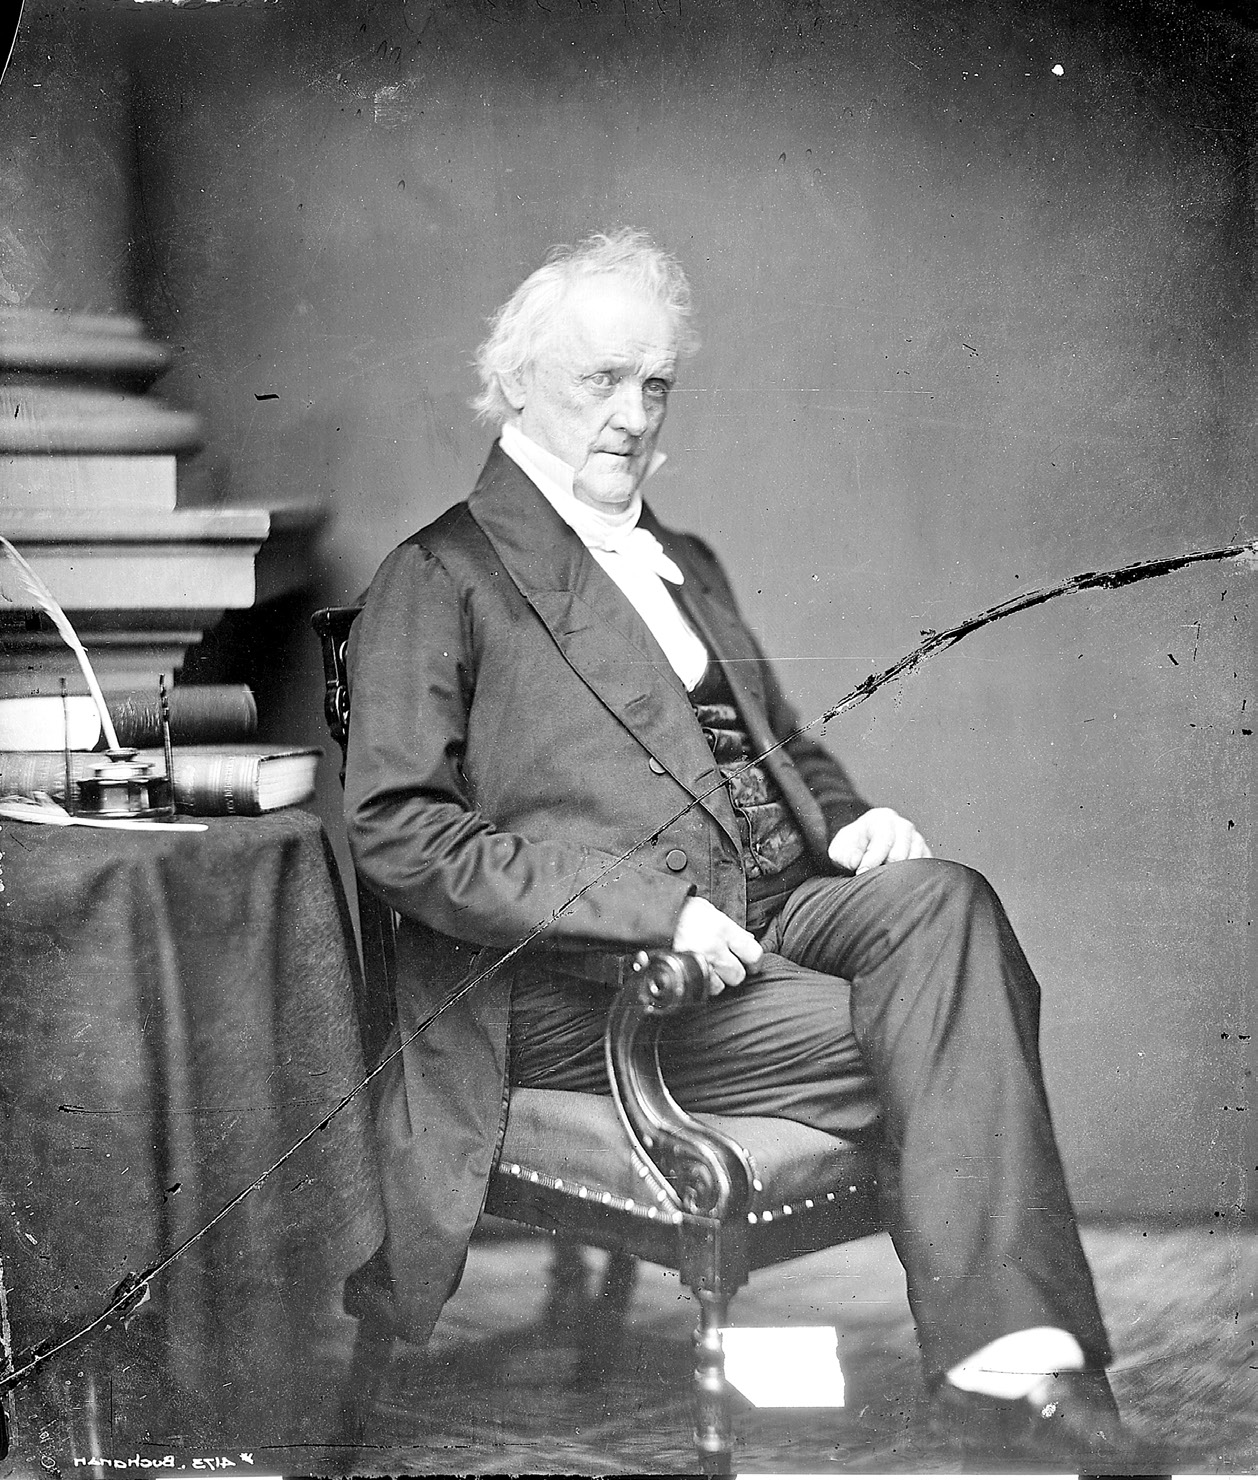 Hon. James Buchanan, photograph by Mathew Brady, Brady National Photographic Art Gallery, US National Archives and Records Administration.